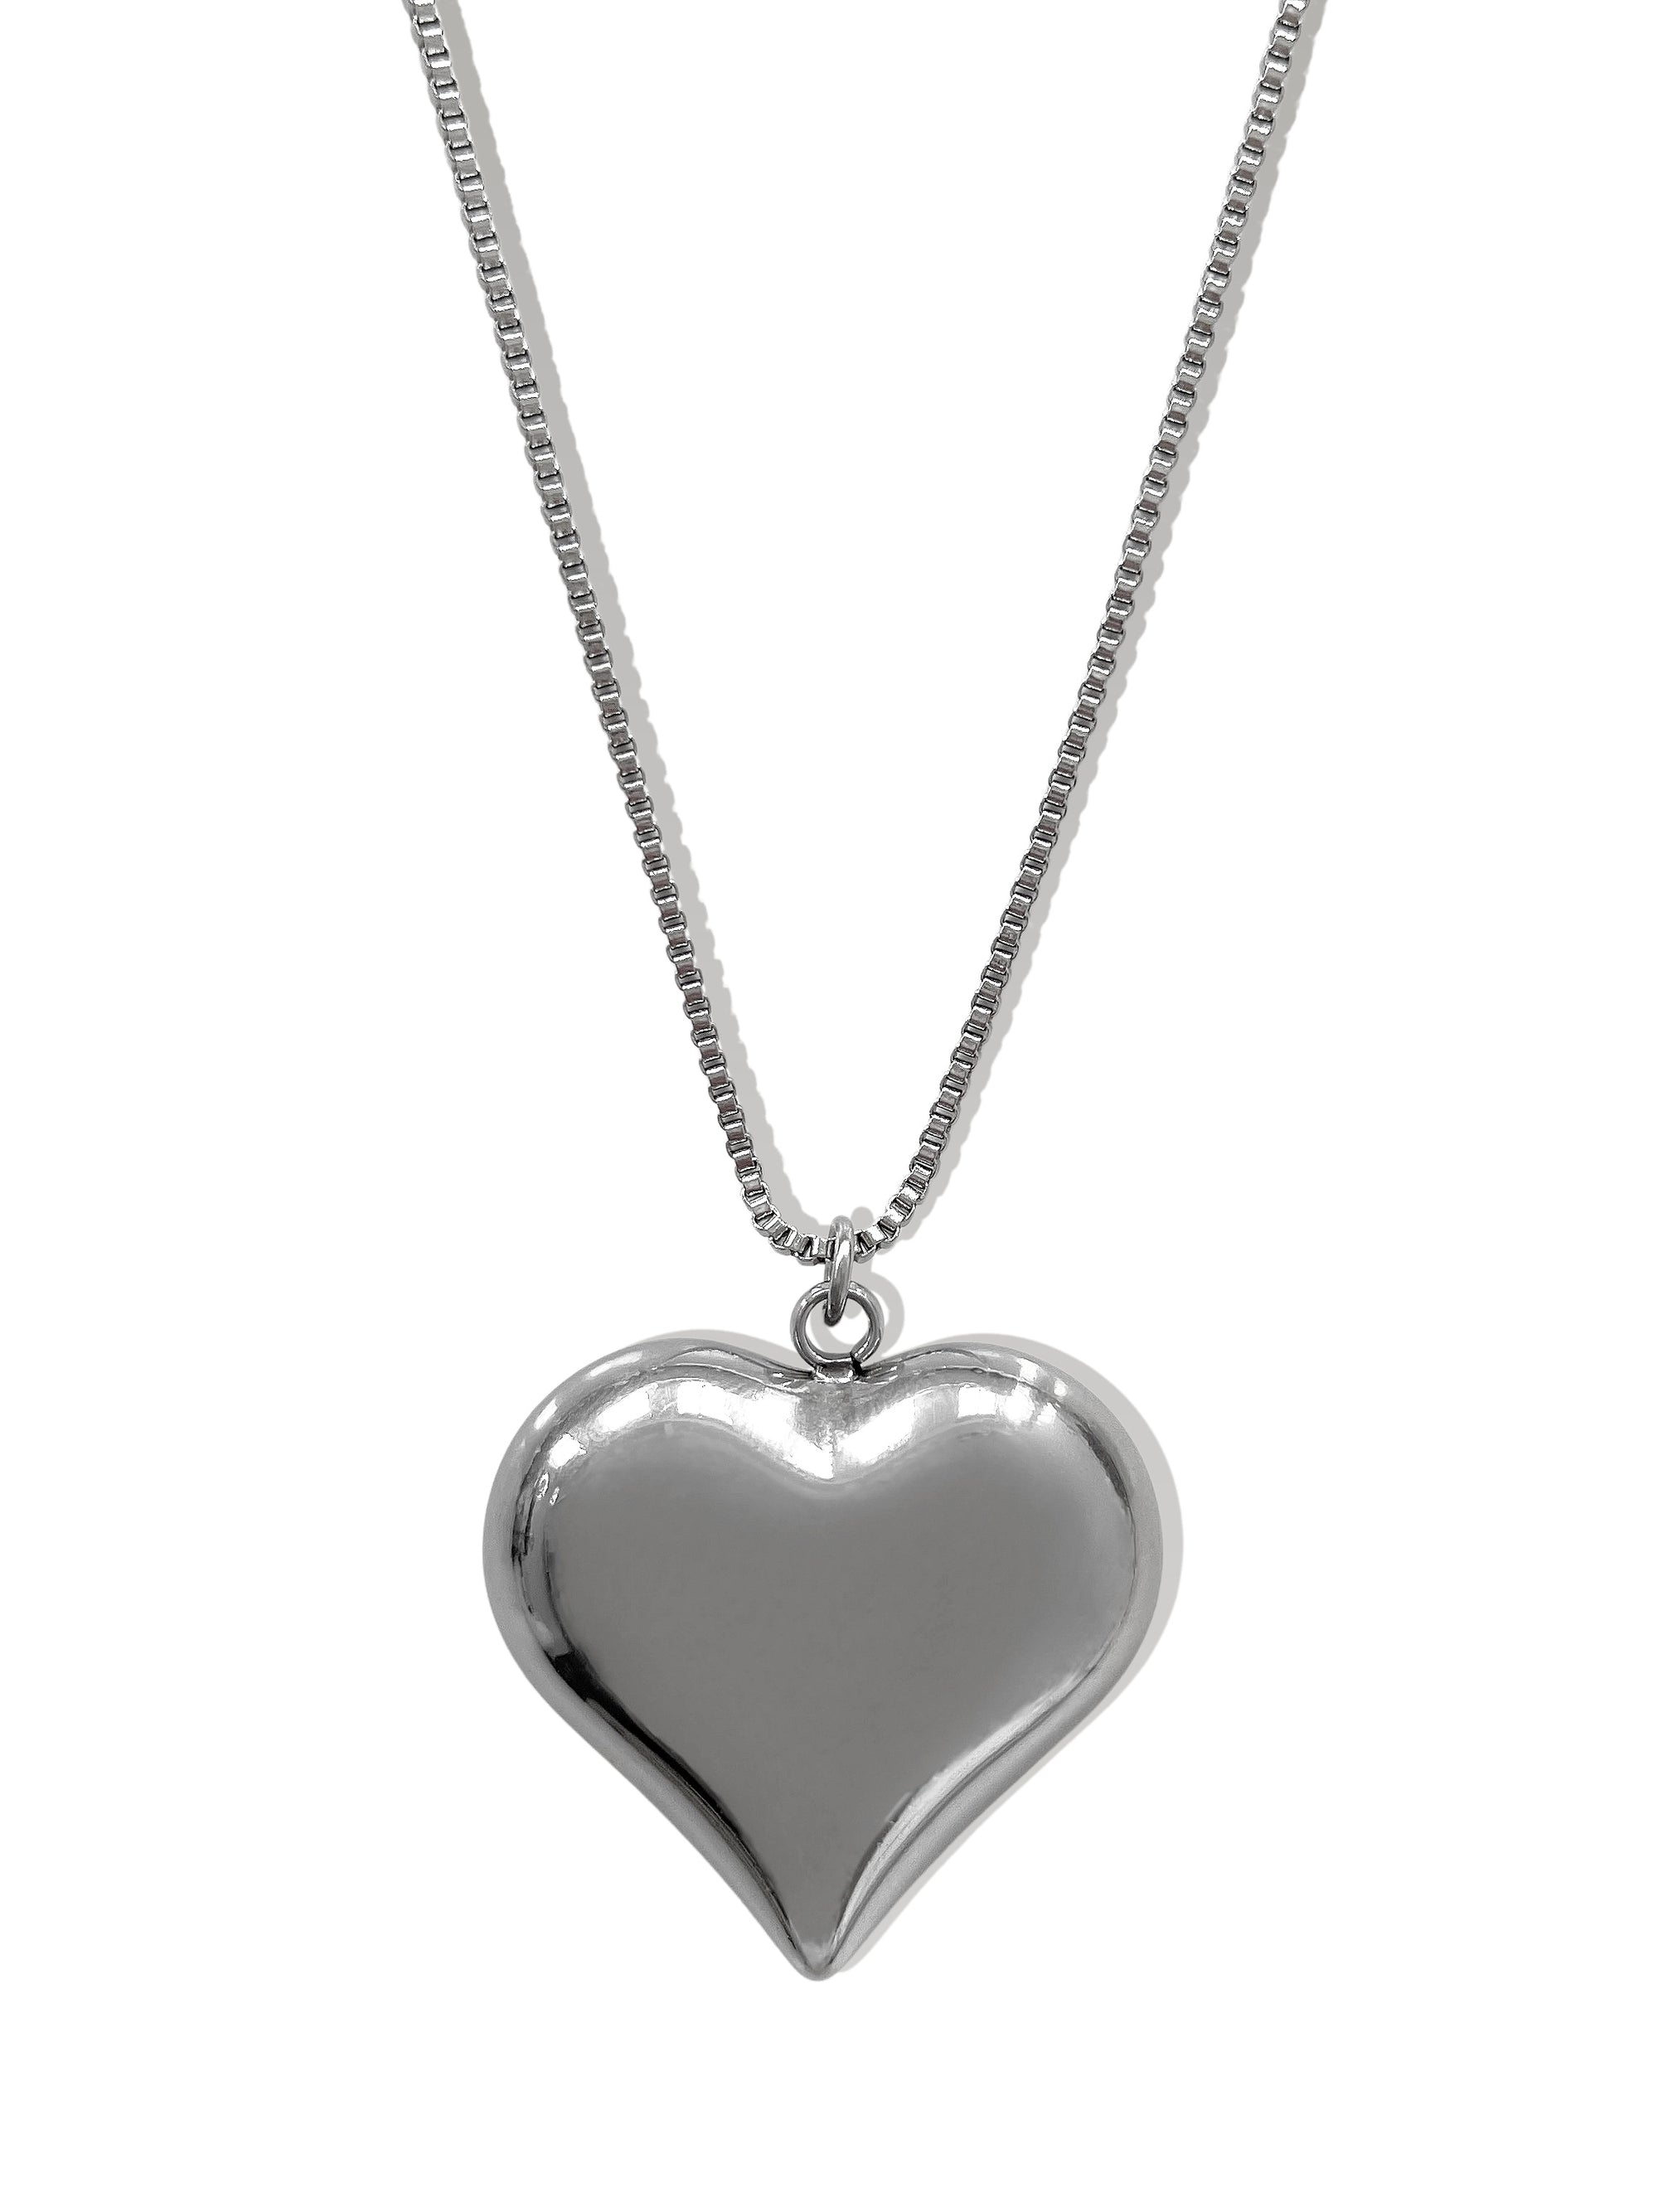 GEMMA LARGE HEART CHAIN NECKLACE